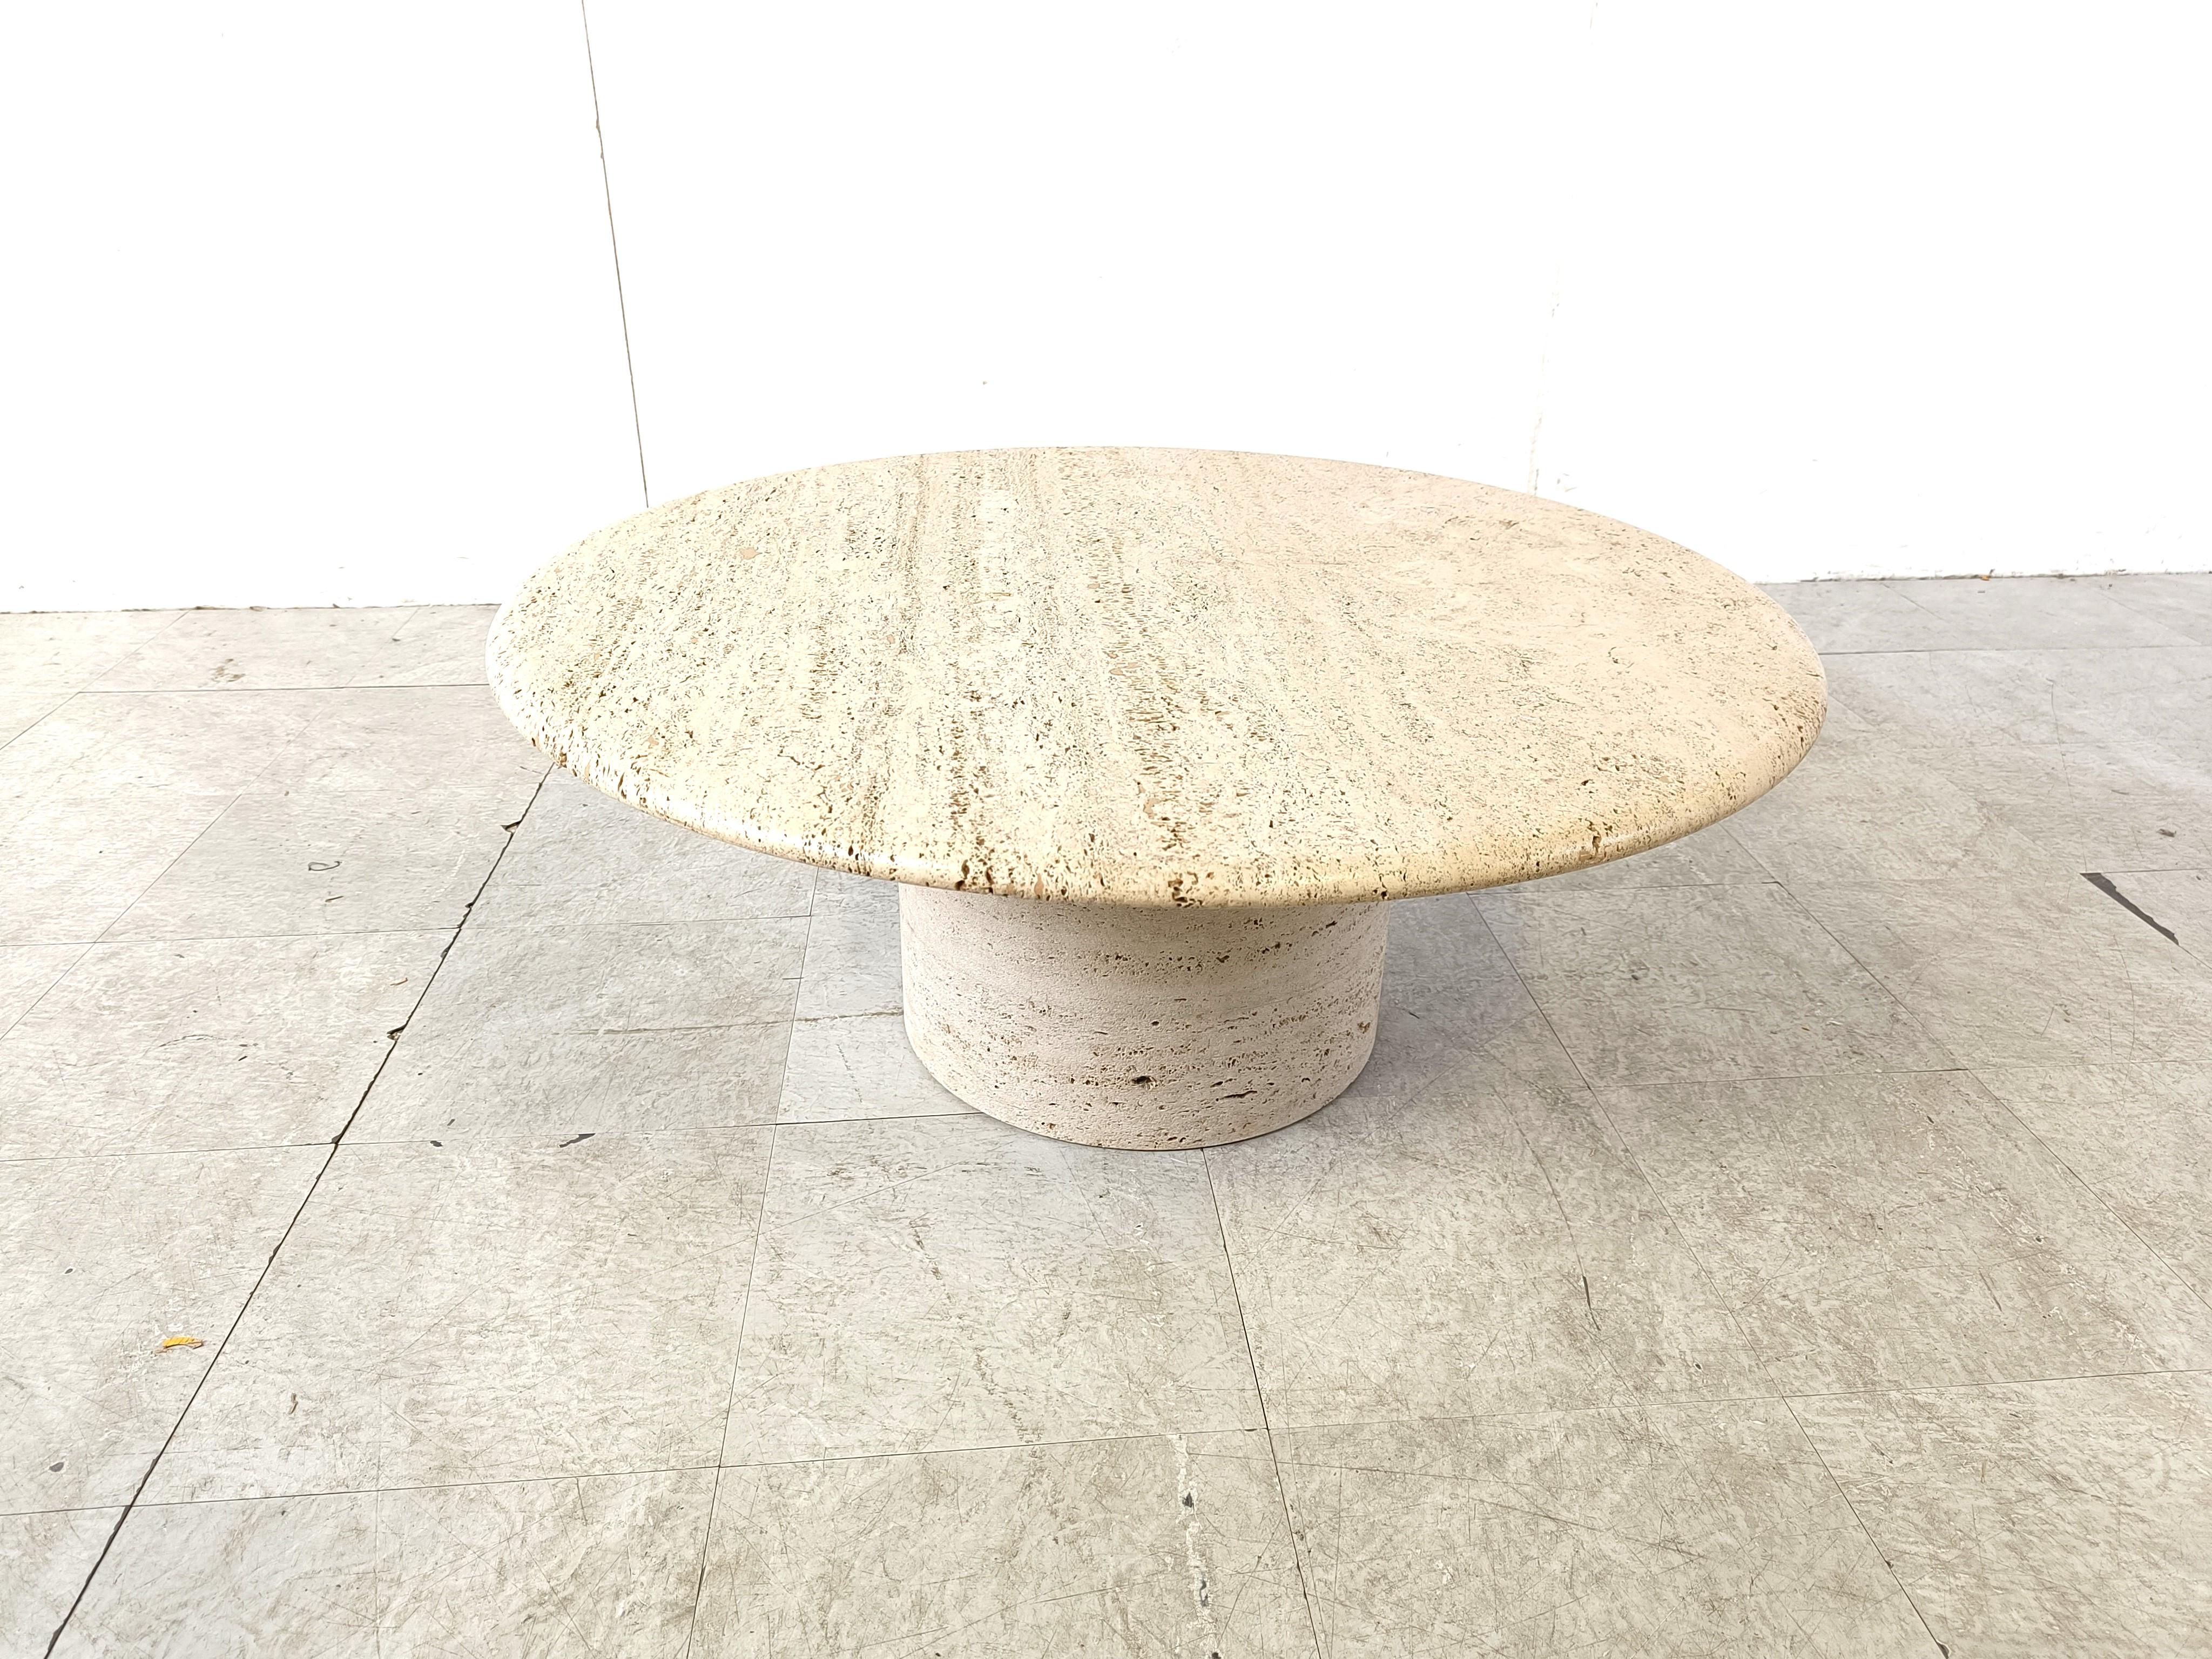 Timeless travertine coffee table with a round and nicely finished top mounted on a round cyllindrical base.

Gorgeous natural travertine stone.

Good condition

1970s - Italy

Height: 37cm
Diameter: 90cm

Ref.: 203066